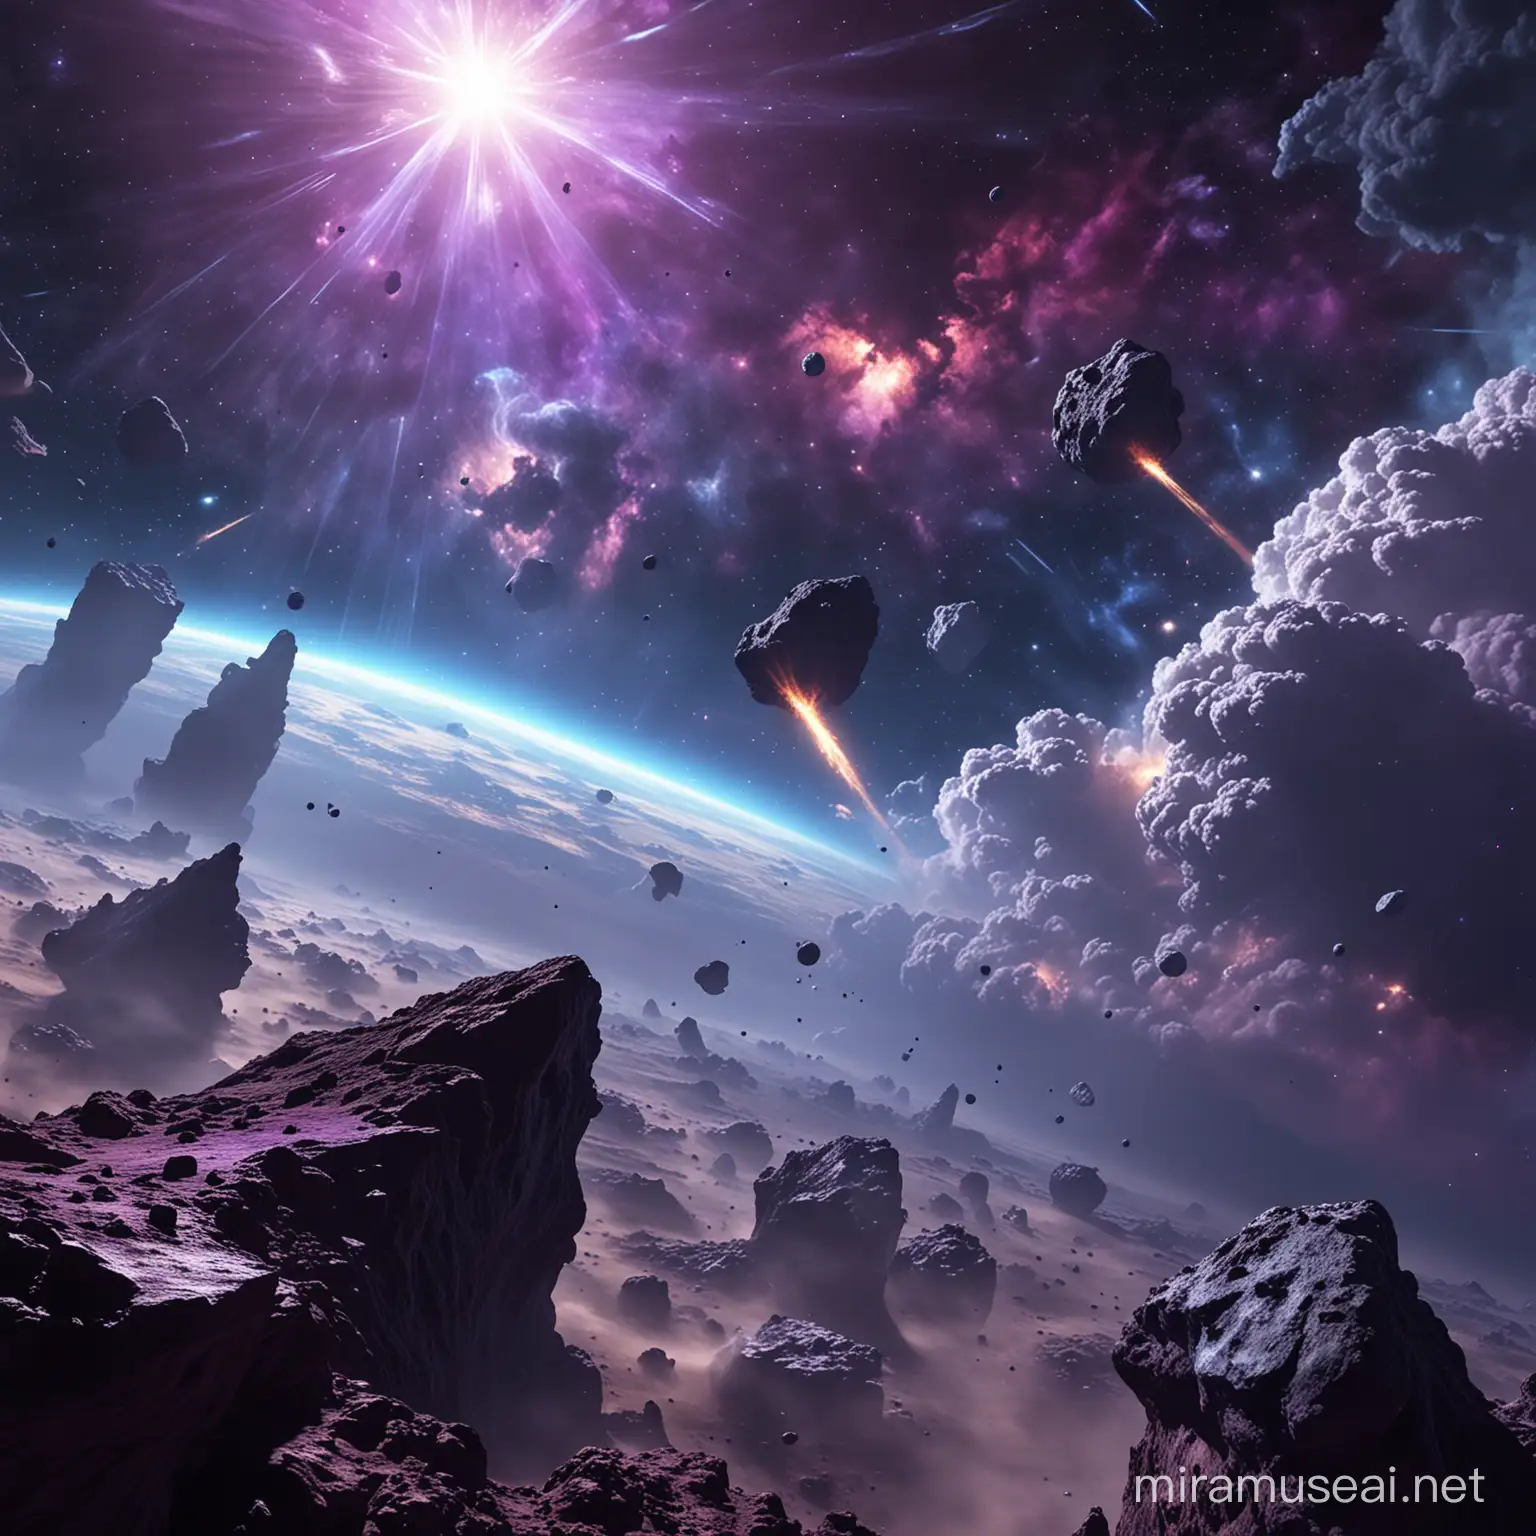 Cosmic Landscape with Blue and Purple Hues Asteroids and Nebulous Clouds